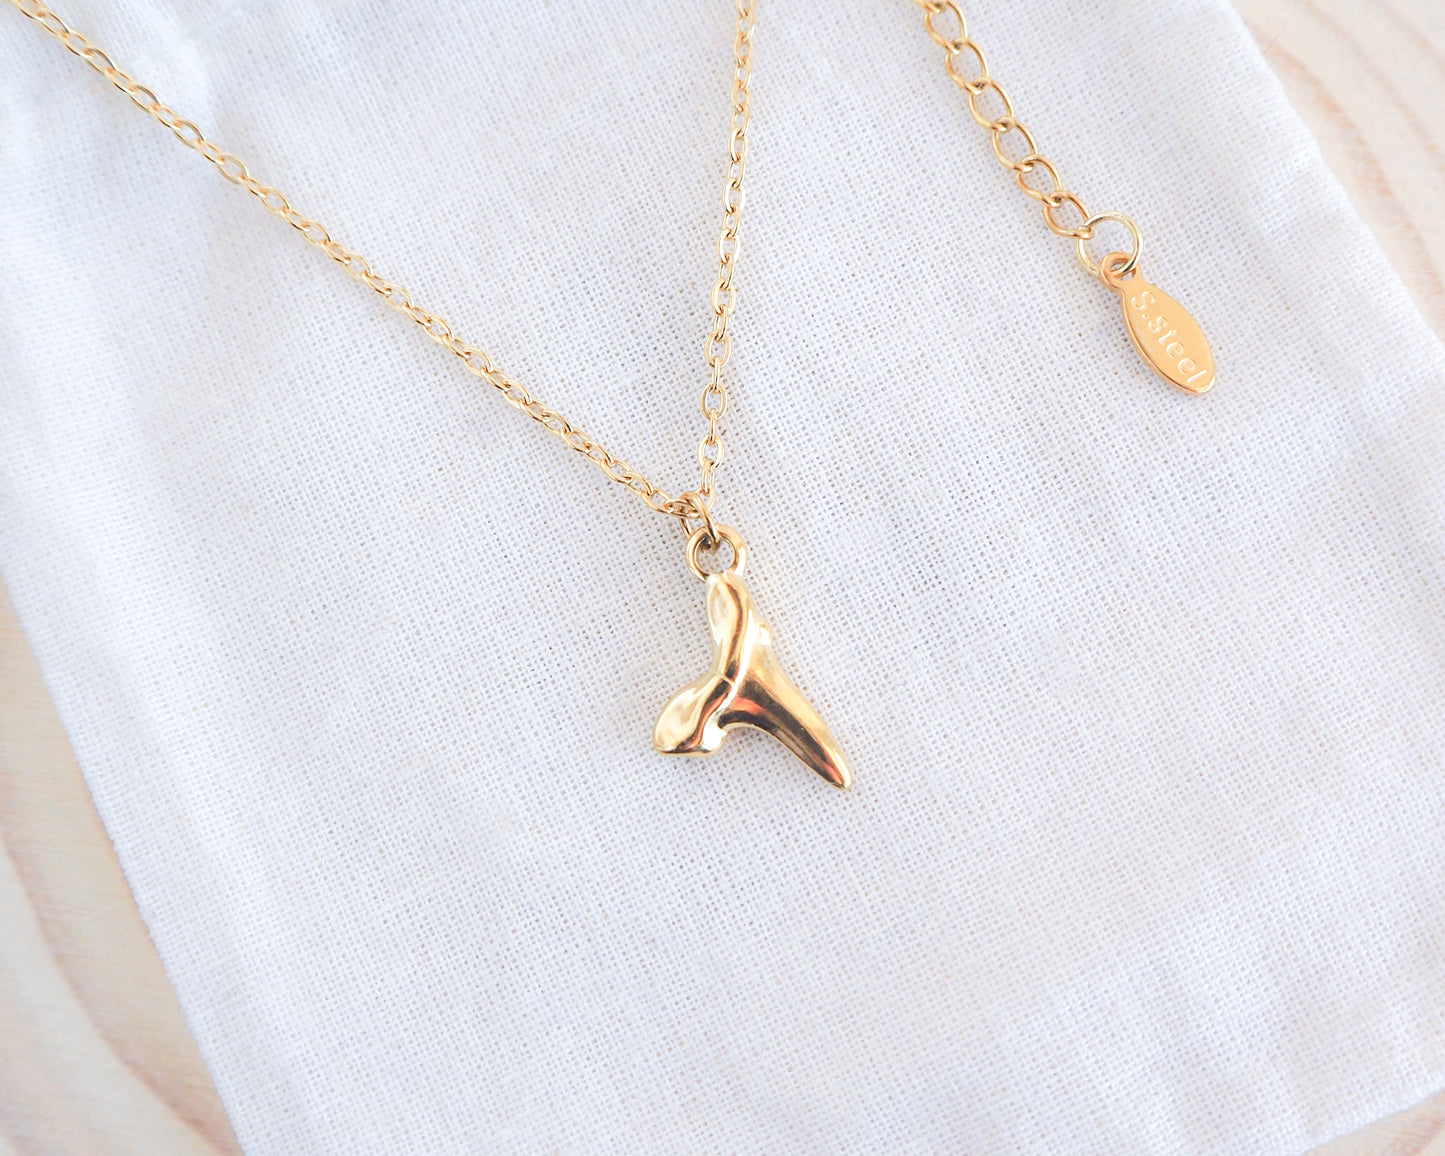 Gold Stainless Steel Necklace with Shark Tooth Pendant on display - Sea by Lou, Seabylou